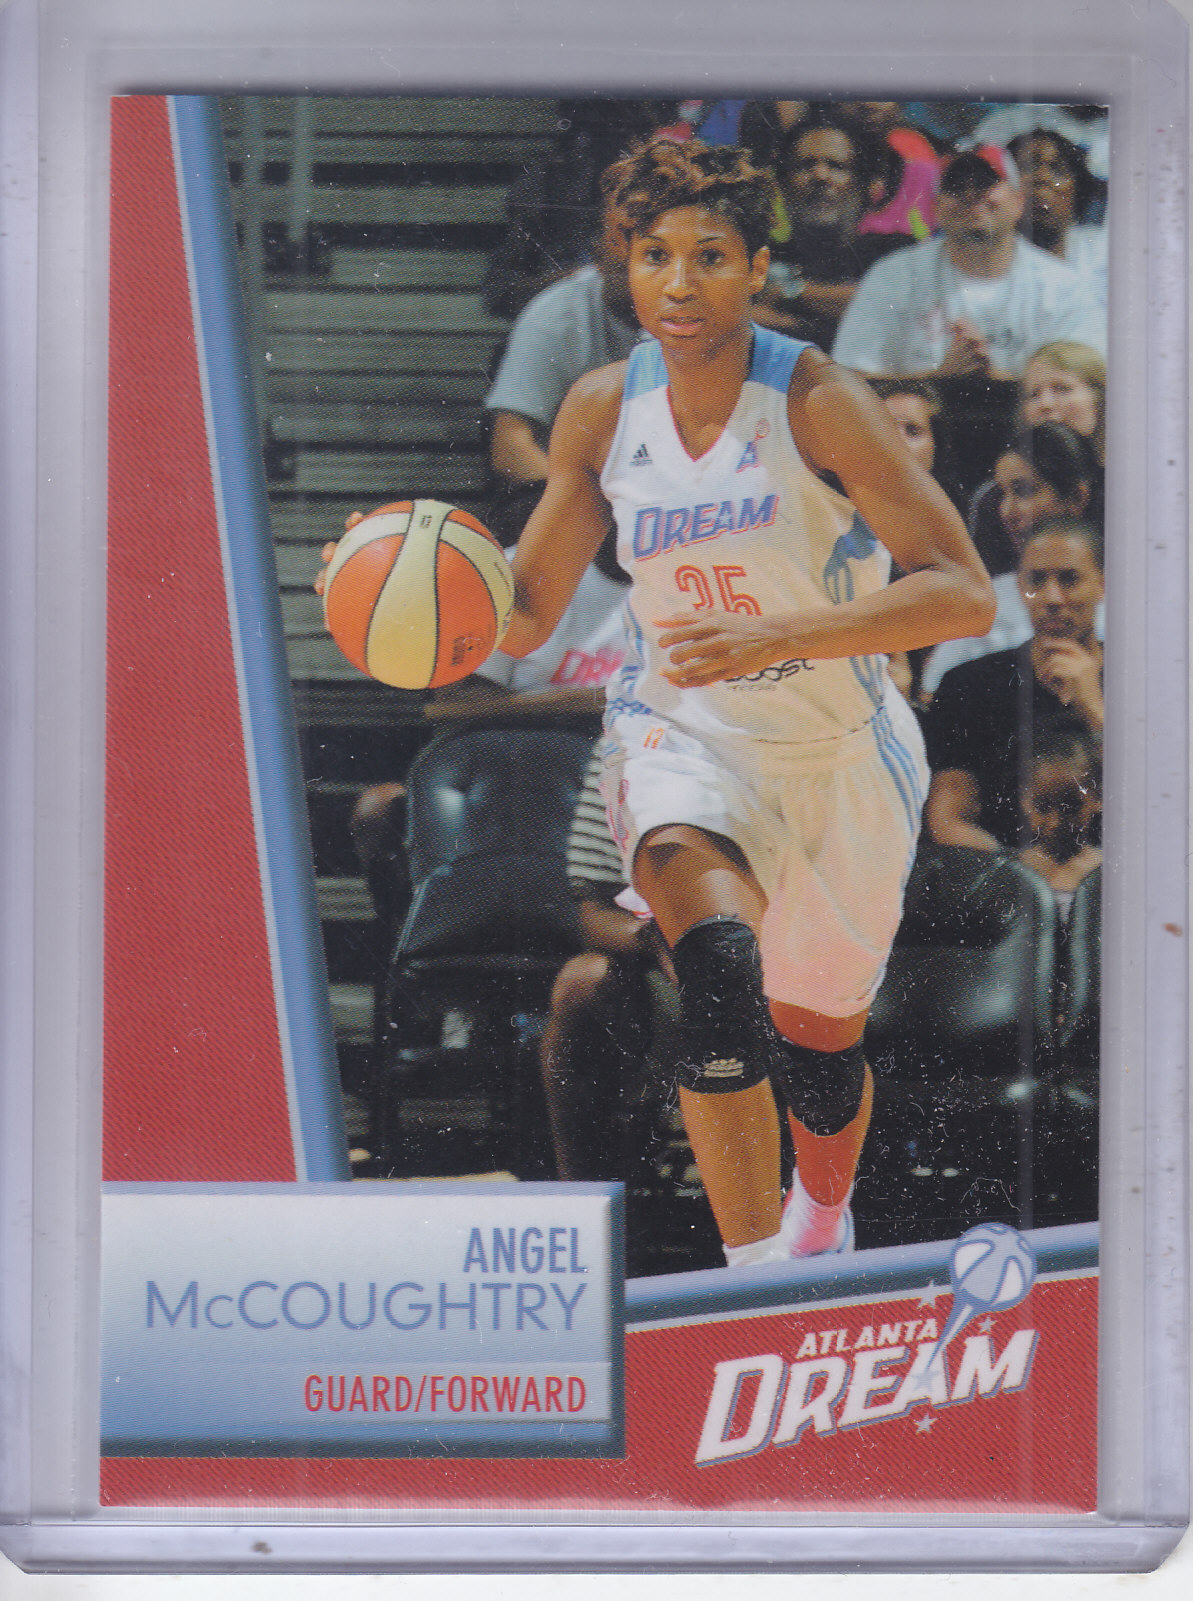  Angel McCoughtry player image